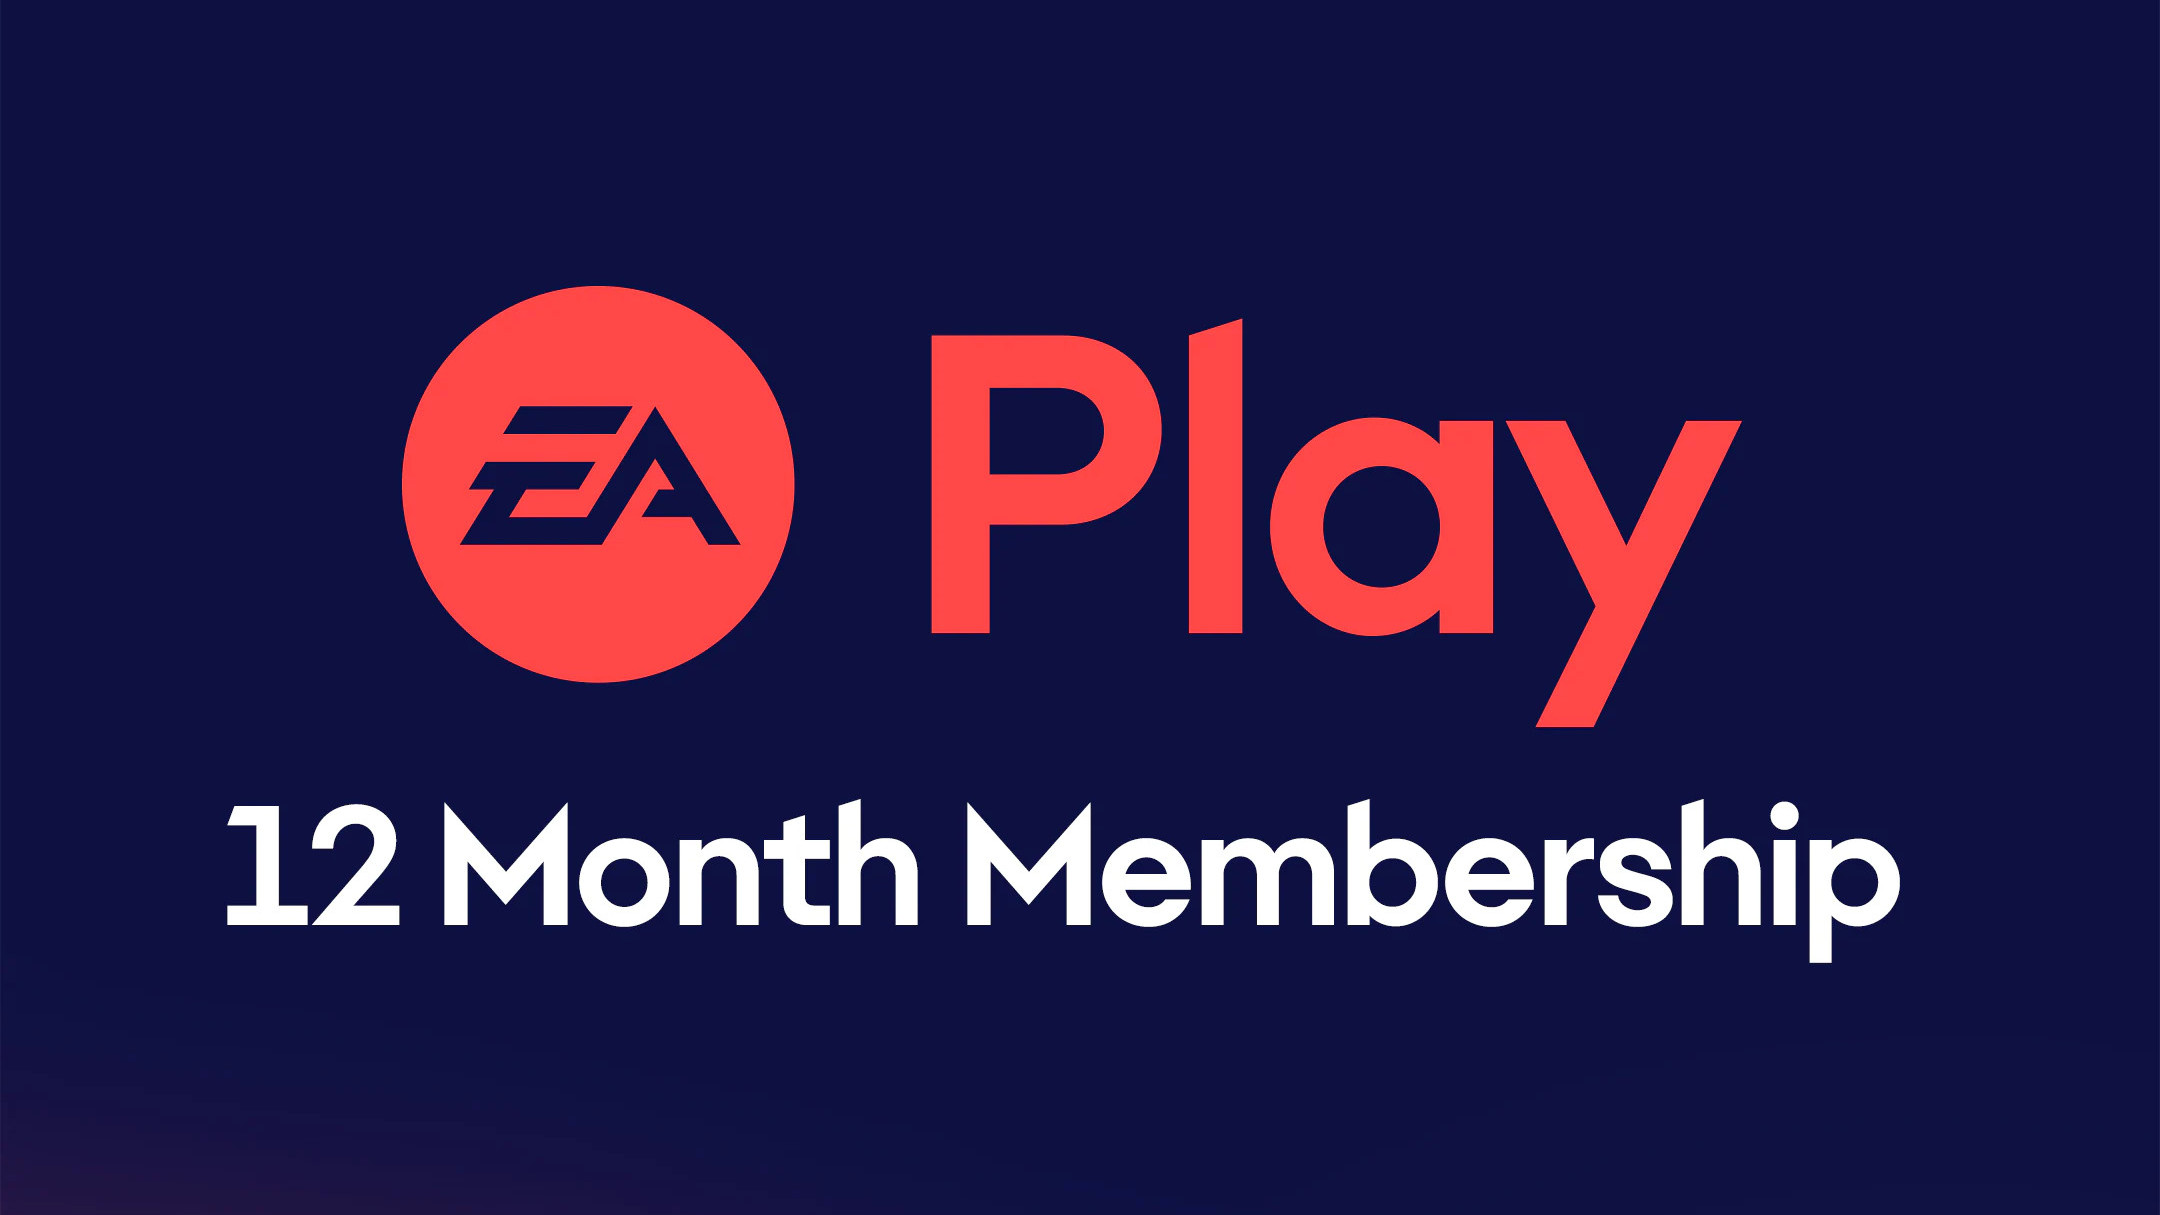 EA Play - 12 Months Subscription PlayStation 4/5 ACCOUNT 22.53$